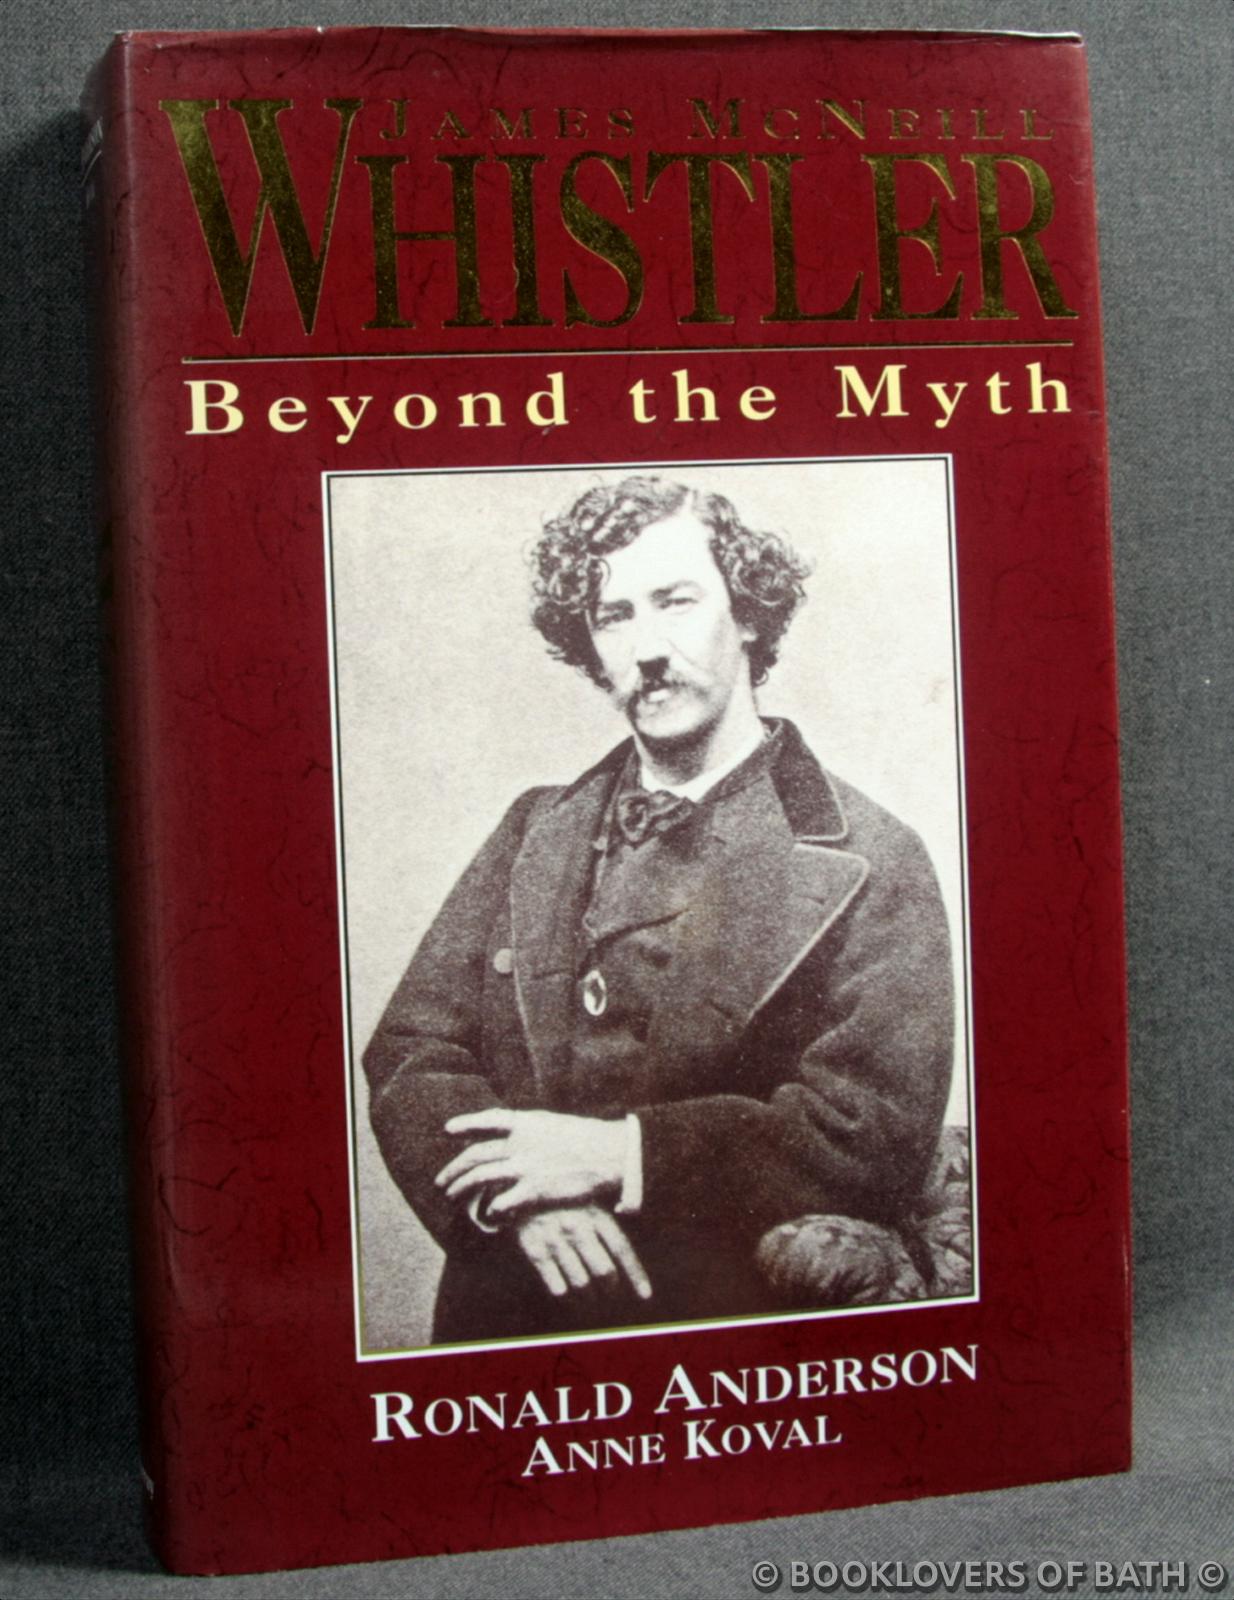 James McNeill Whistler: Beyond the Myth - Ronald Anderson & Anne Koval